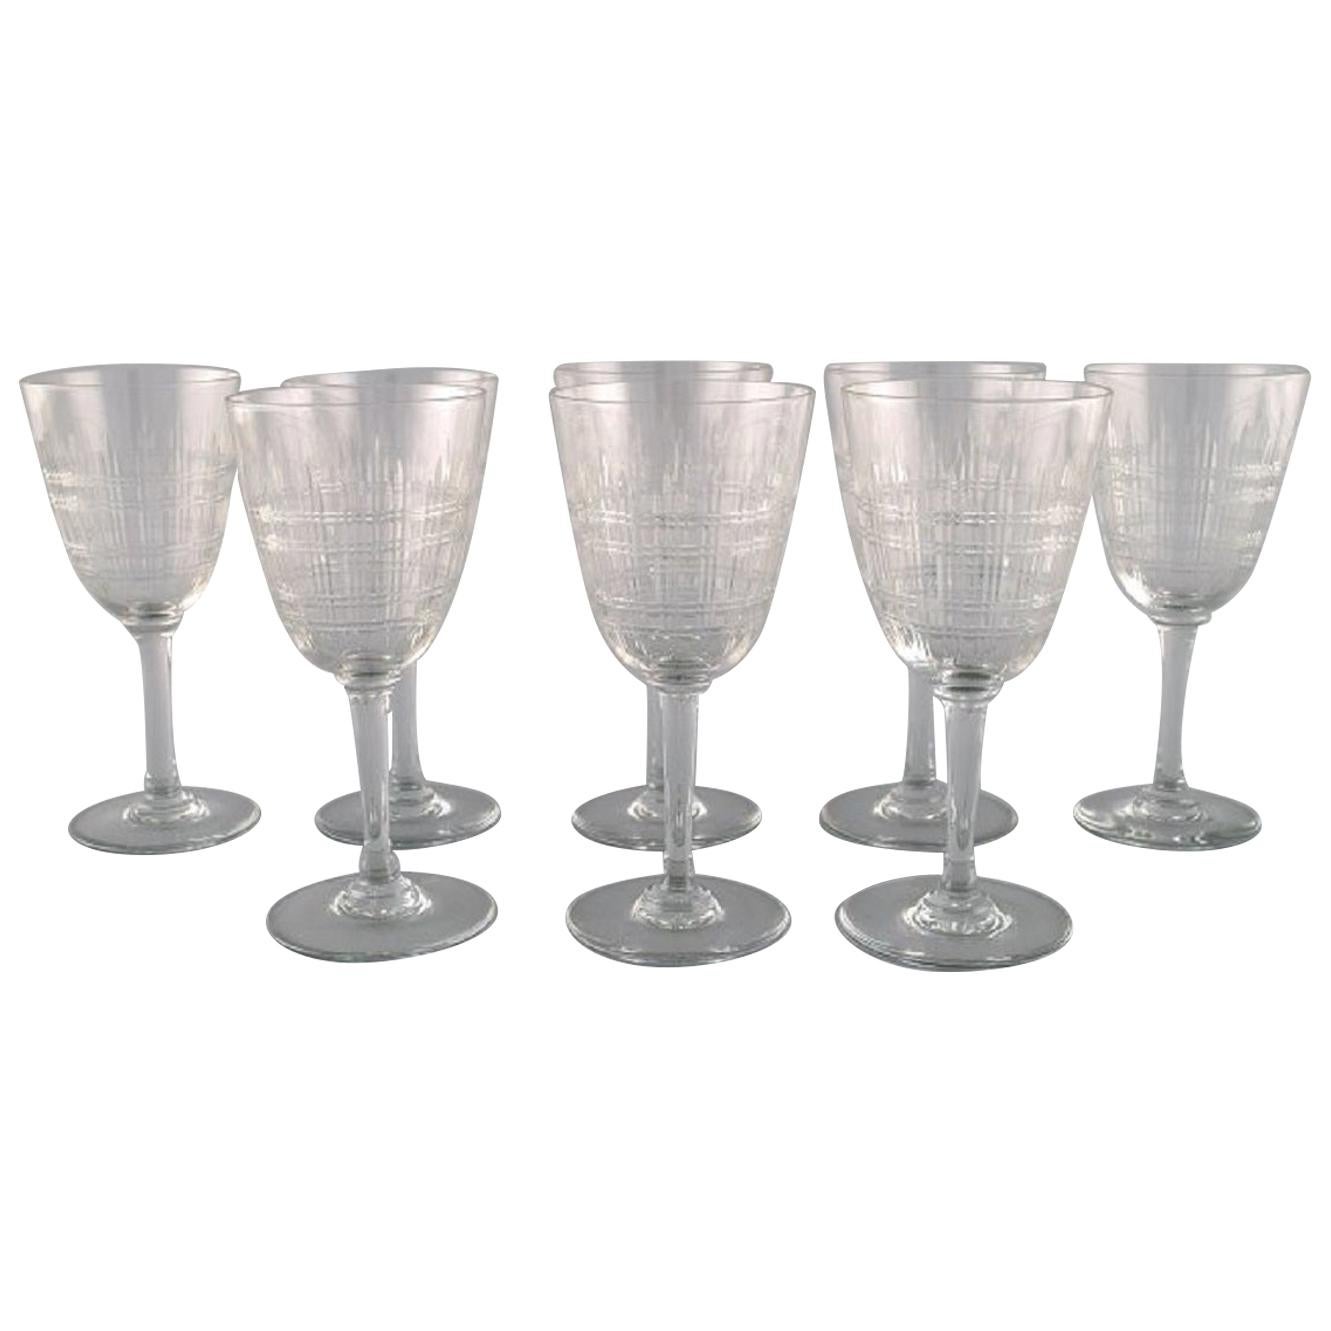 Baccarat, France. Eight Art Deco Cavour Red Wine Glasses, 1920s-1930s